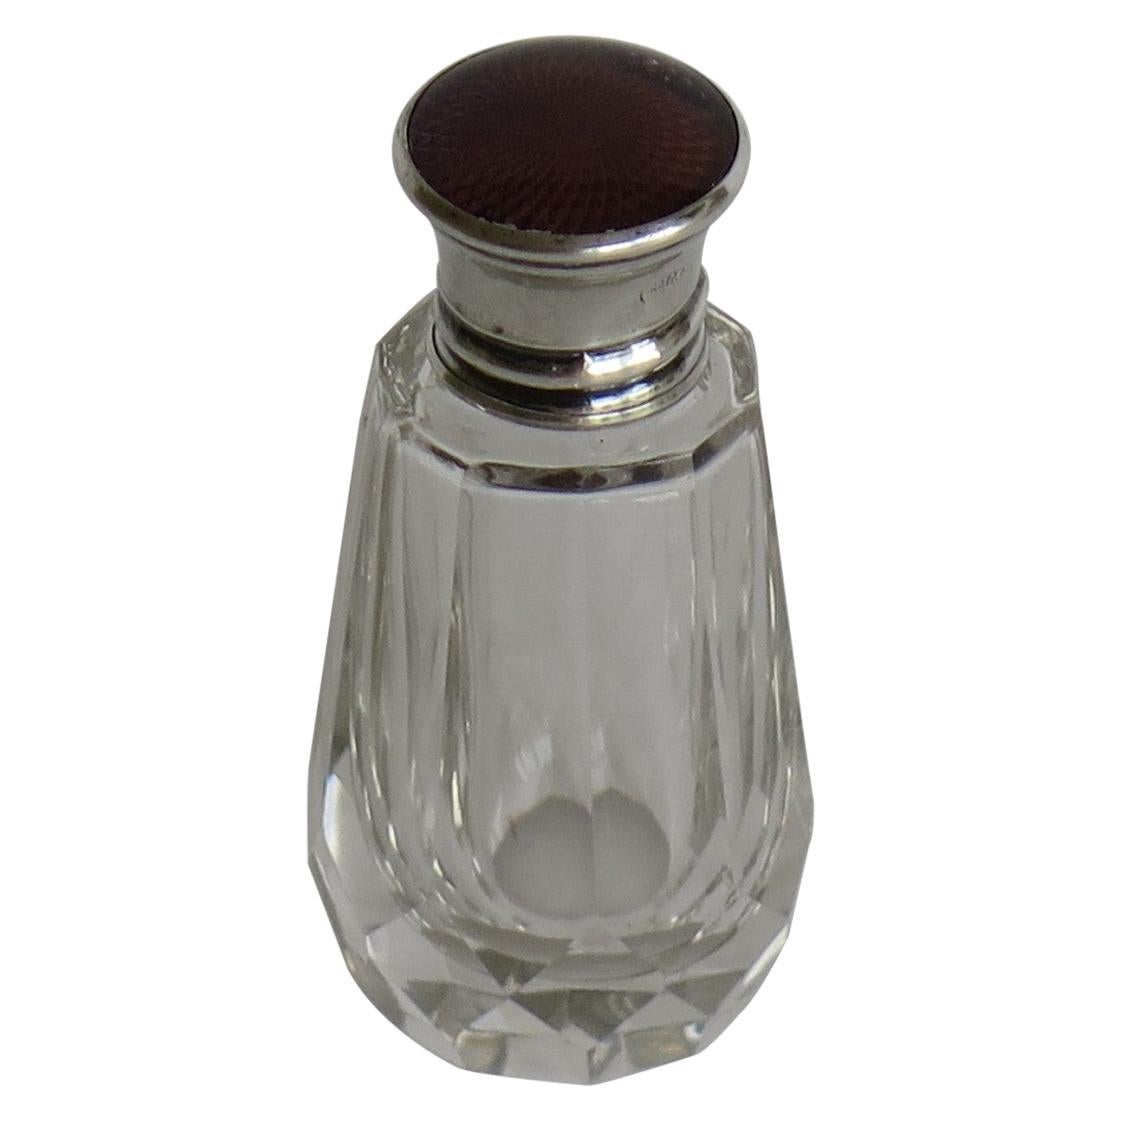 Burgundy Guilloche & Silver Topped Cut Glass Scent or Perfume Bottle London 1921